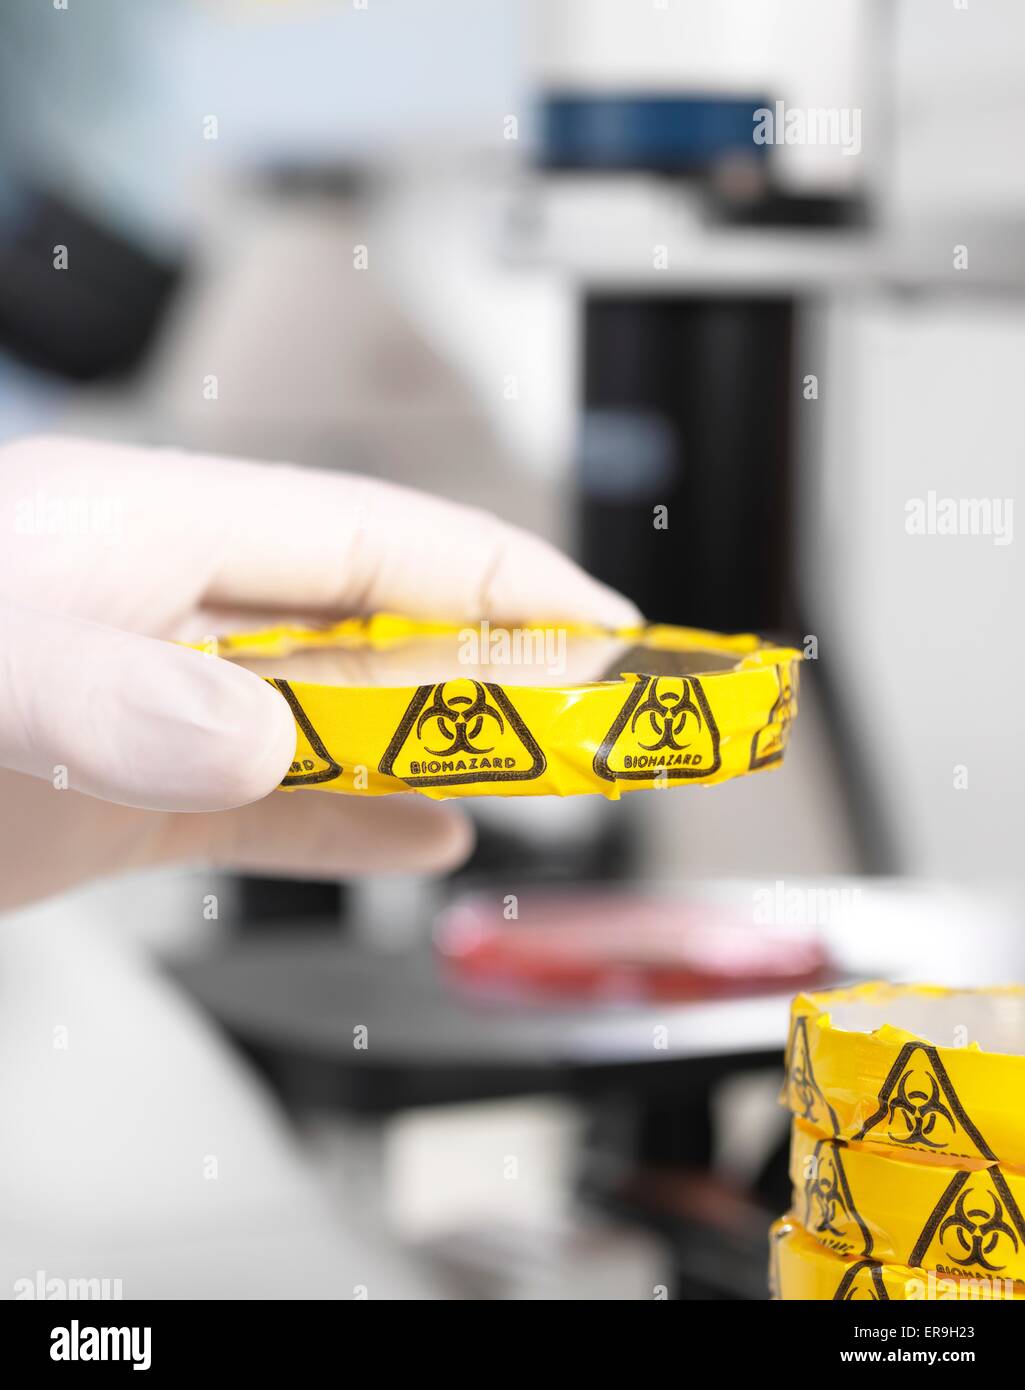 PROPERTY RELEASED. MODEL RELEASED. Scientist experimenting with cultures in petri dishes with biohazard warning in microbiology lab. Stock Photo